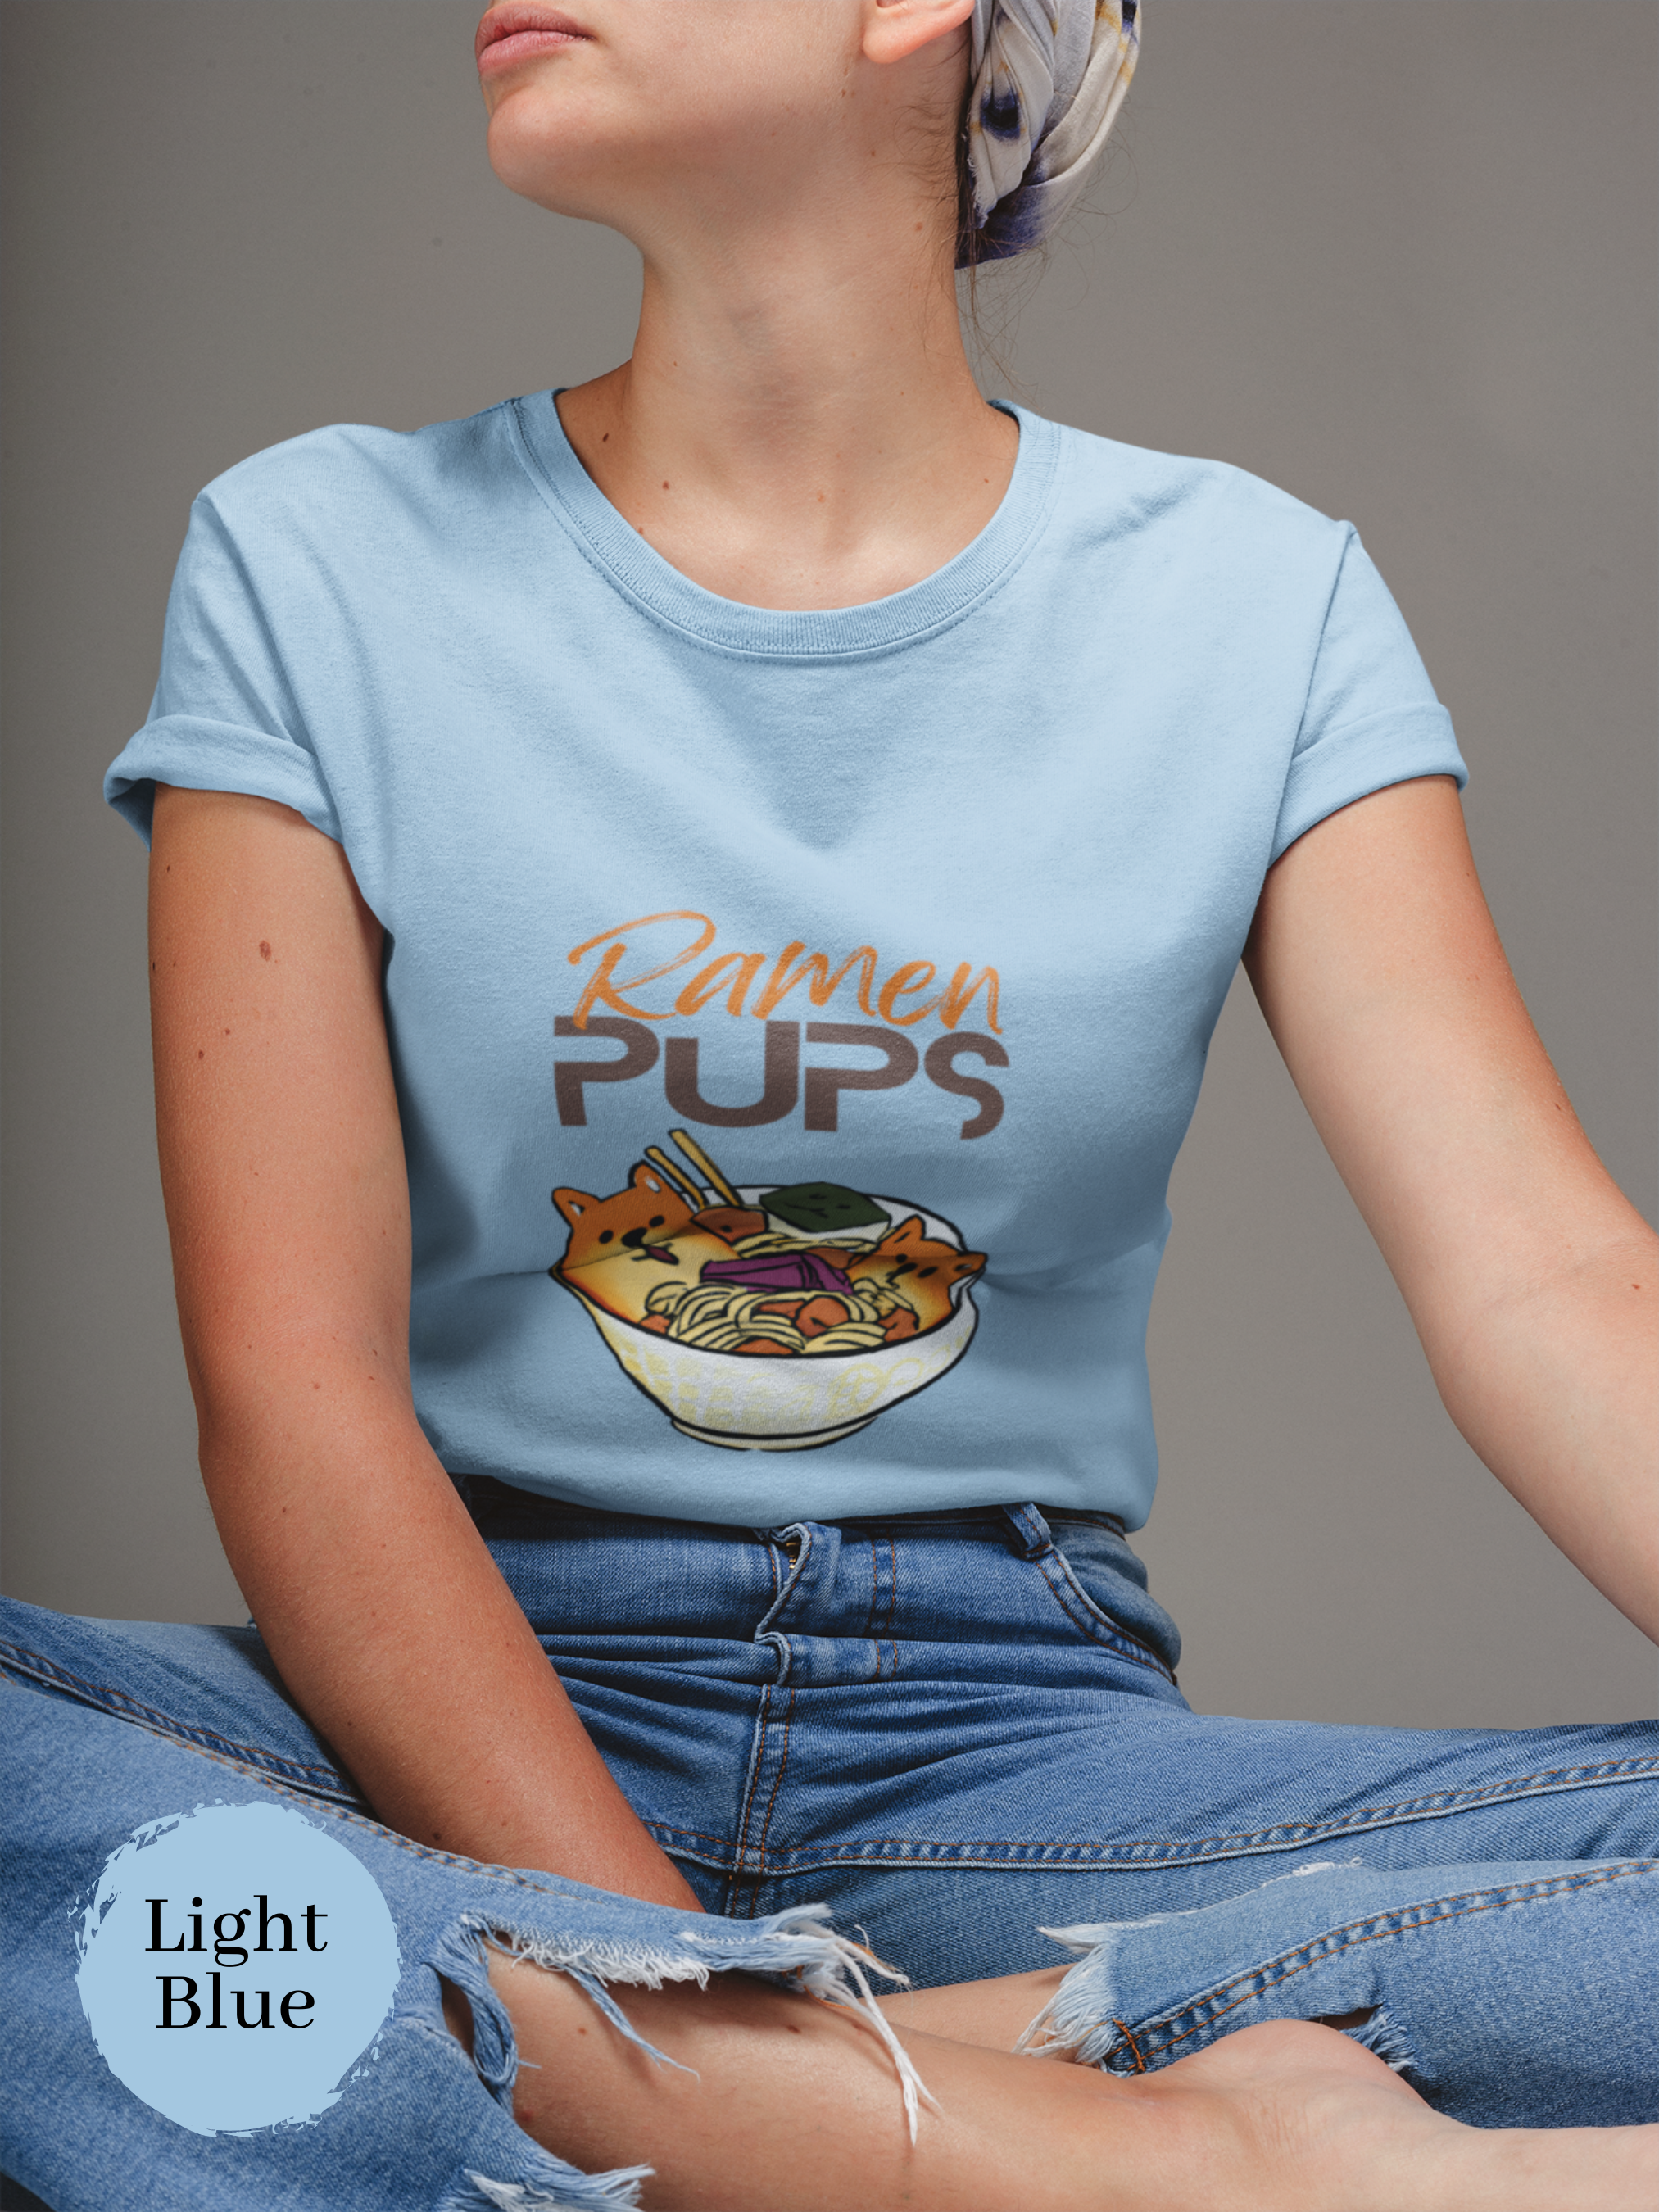 Ramen T-Shirt with Shibas: Cute and Tasty Foodie Shirt with Japanese Ramen Art